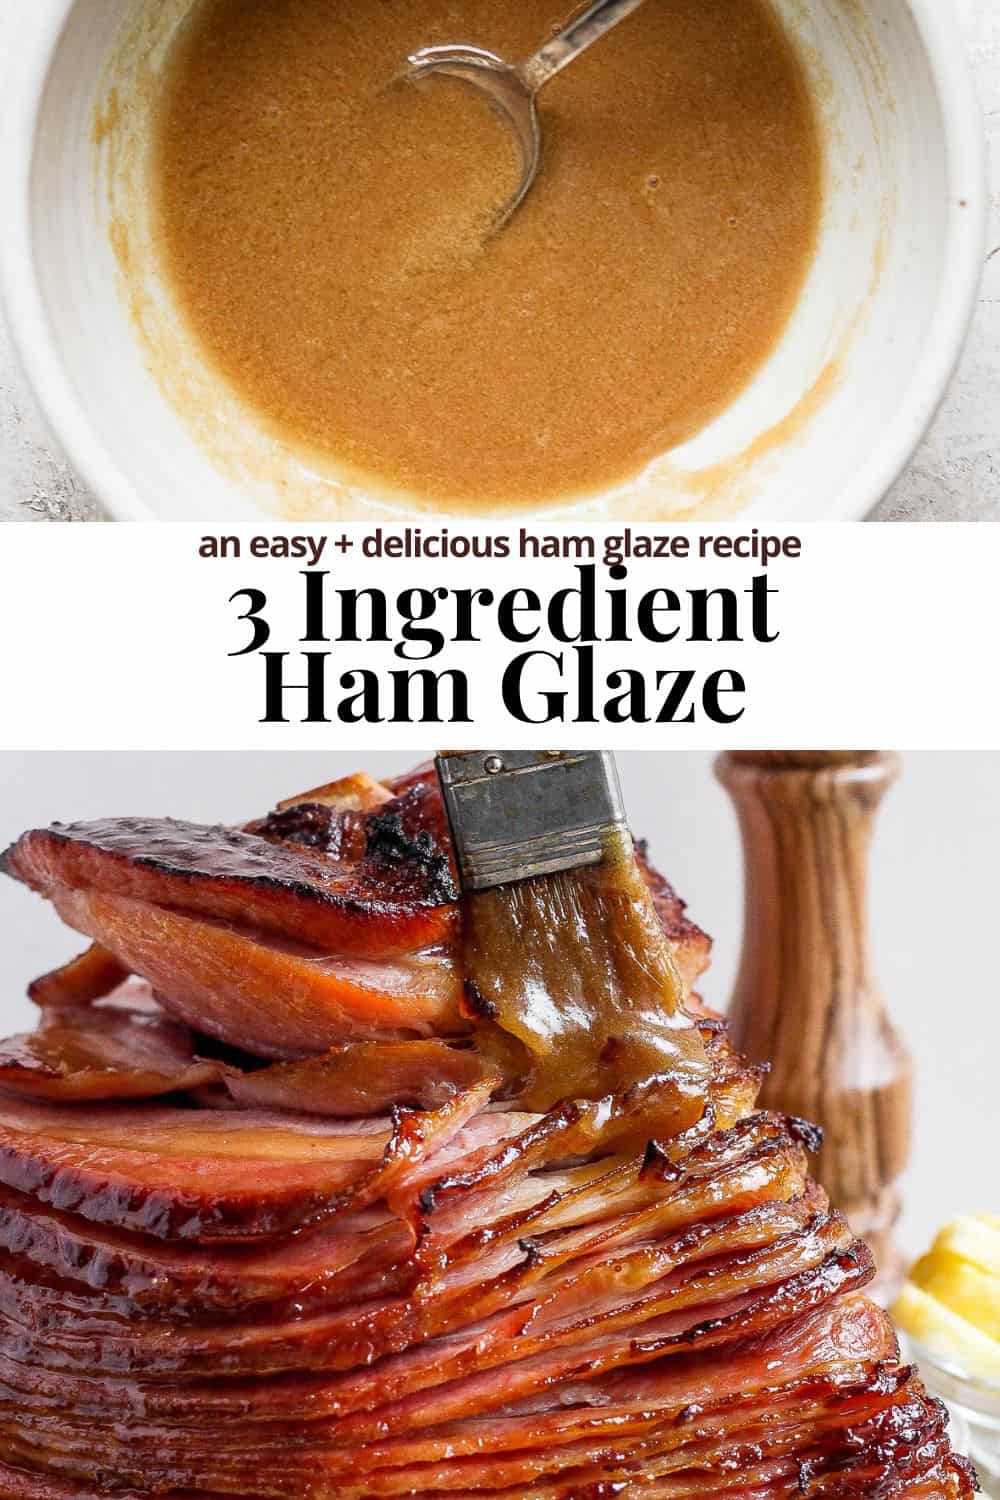 Pinterest image showing ham glaze with the title 3 ingredient ham glaze an easy and delicious ham glaze recipe.